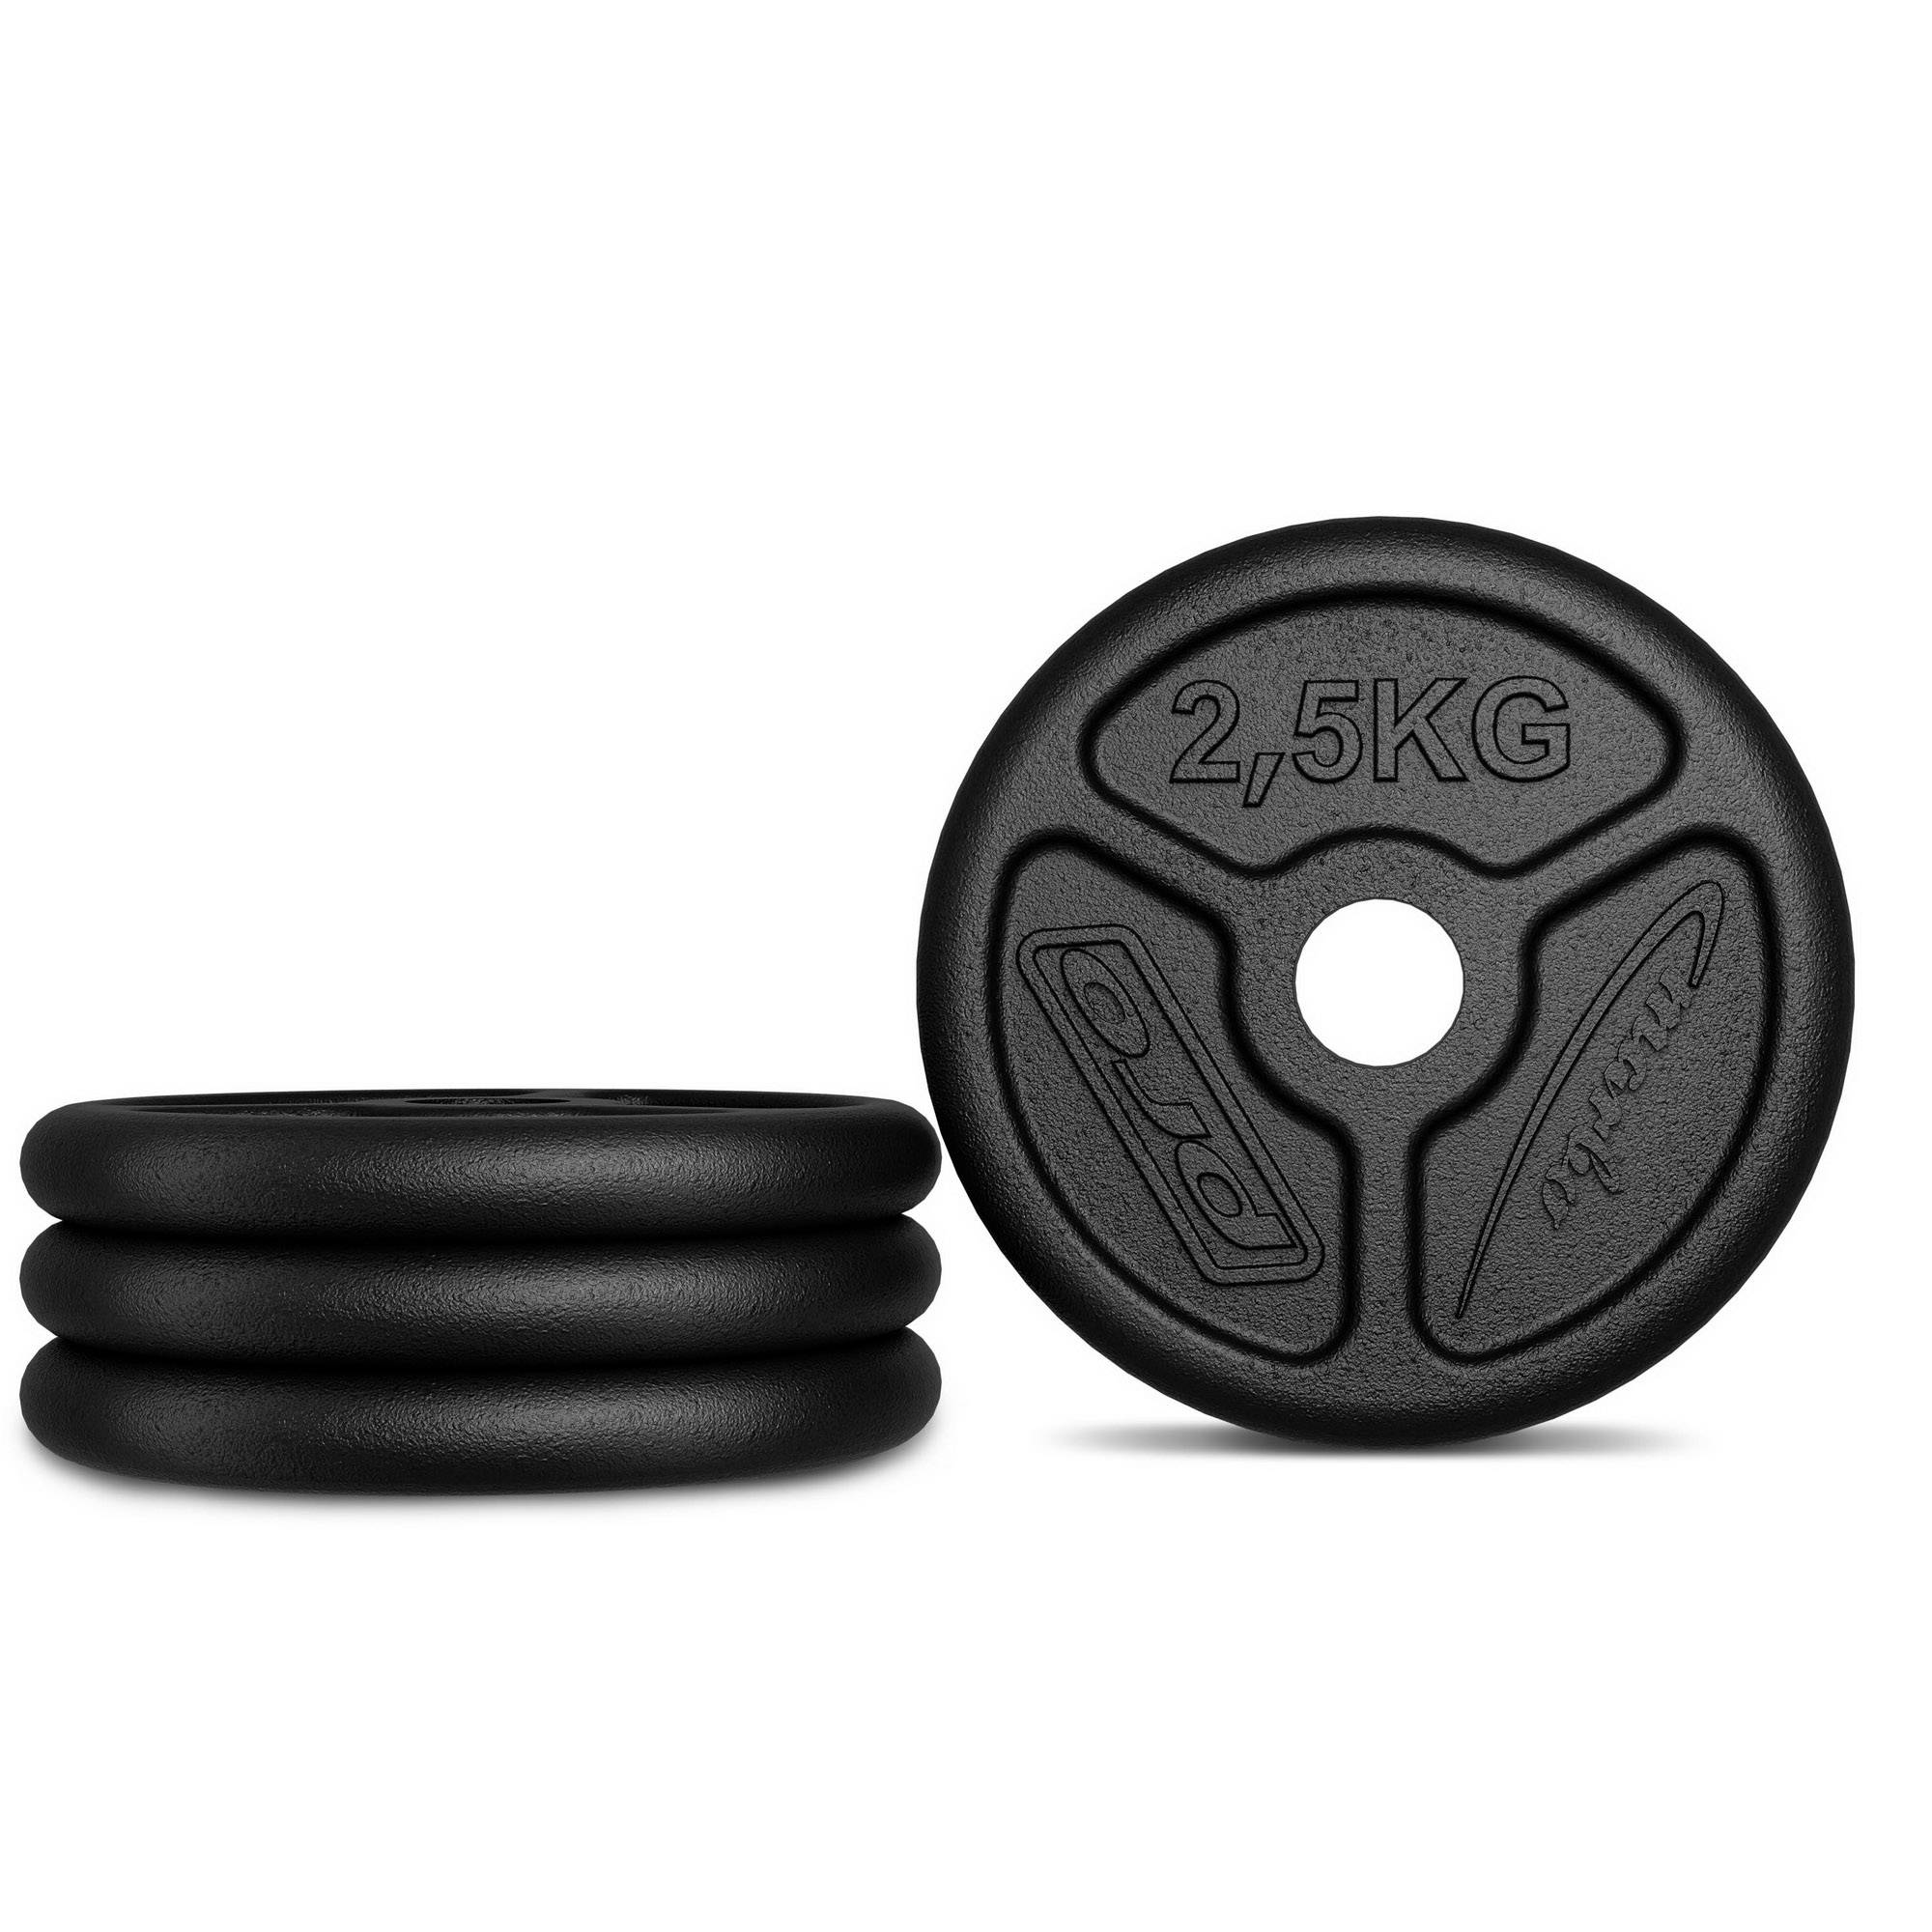 \\ Week bore kg Standard and discs Black plates Sport Marbo Cyber Weight 2023 slim ø31 Standard 2023 with 2.5 kg - iron Bars \\ | mm MW-O2,5-slim Plates plates Weight Week 2,5 weight